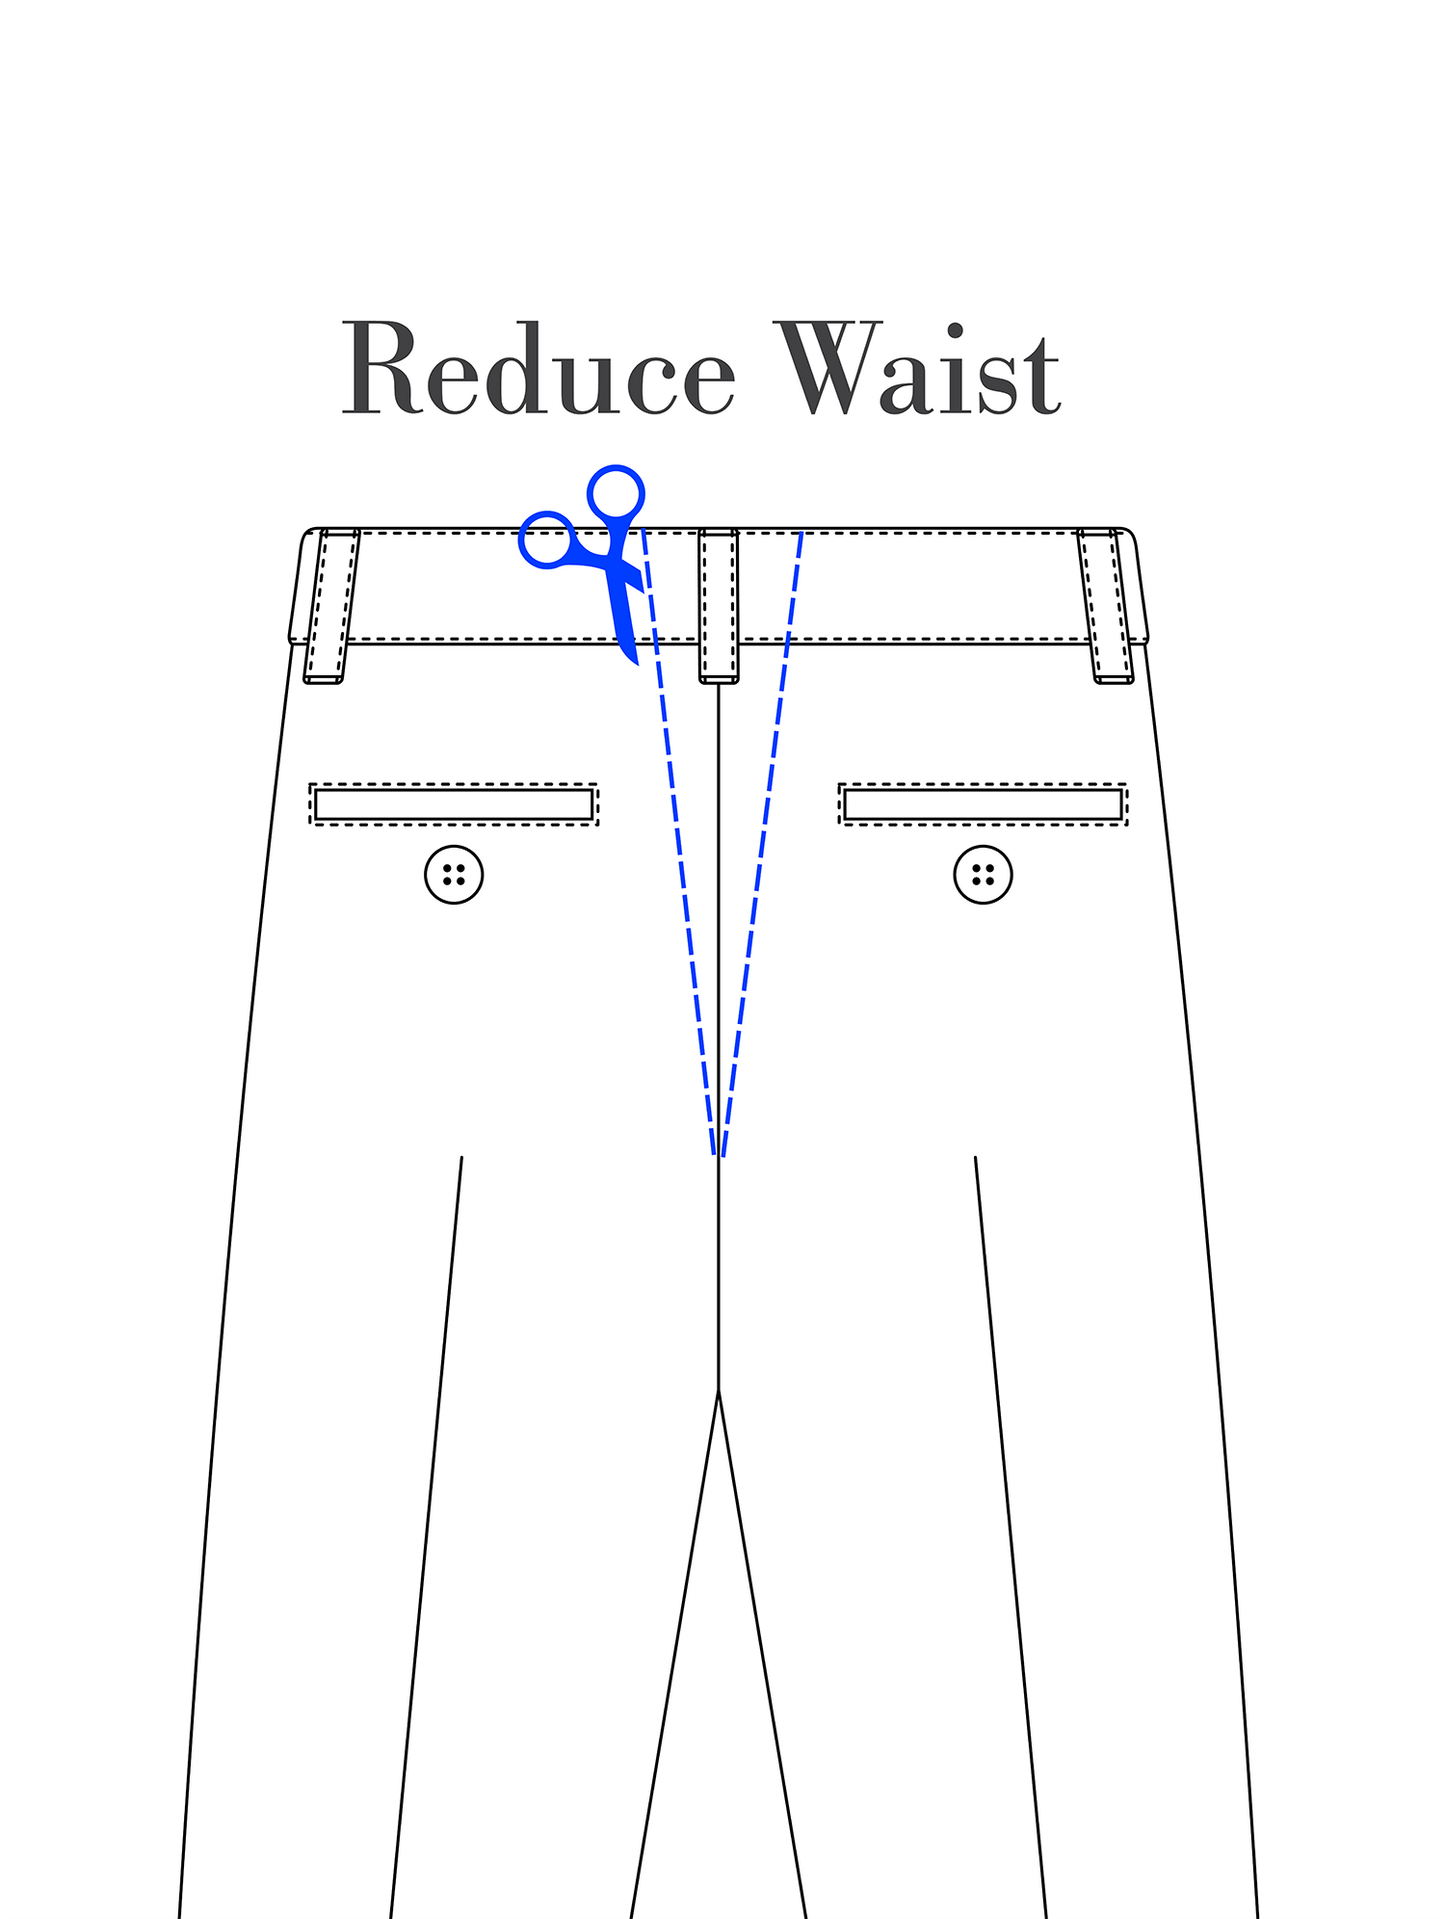 Reduce Waist Size (Trousers)